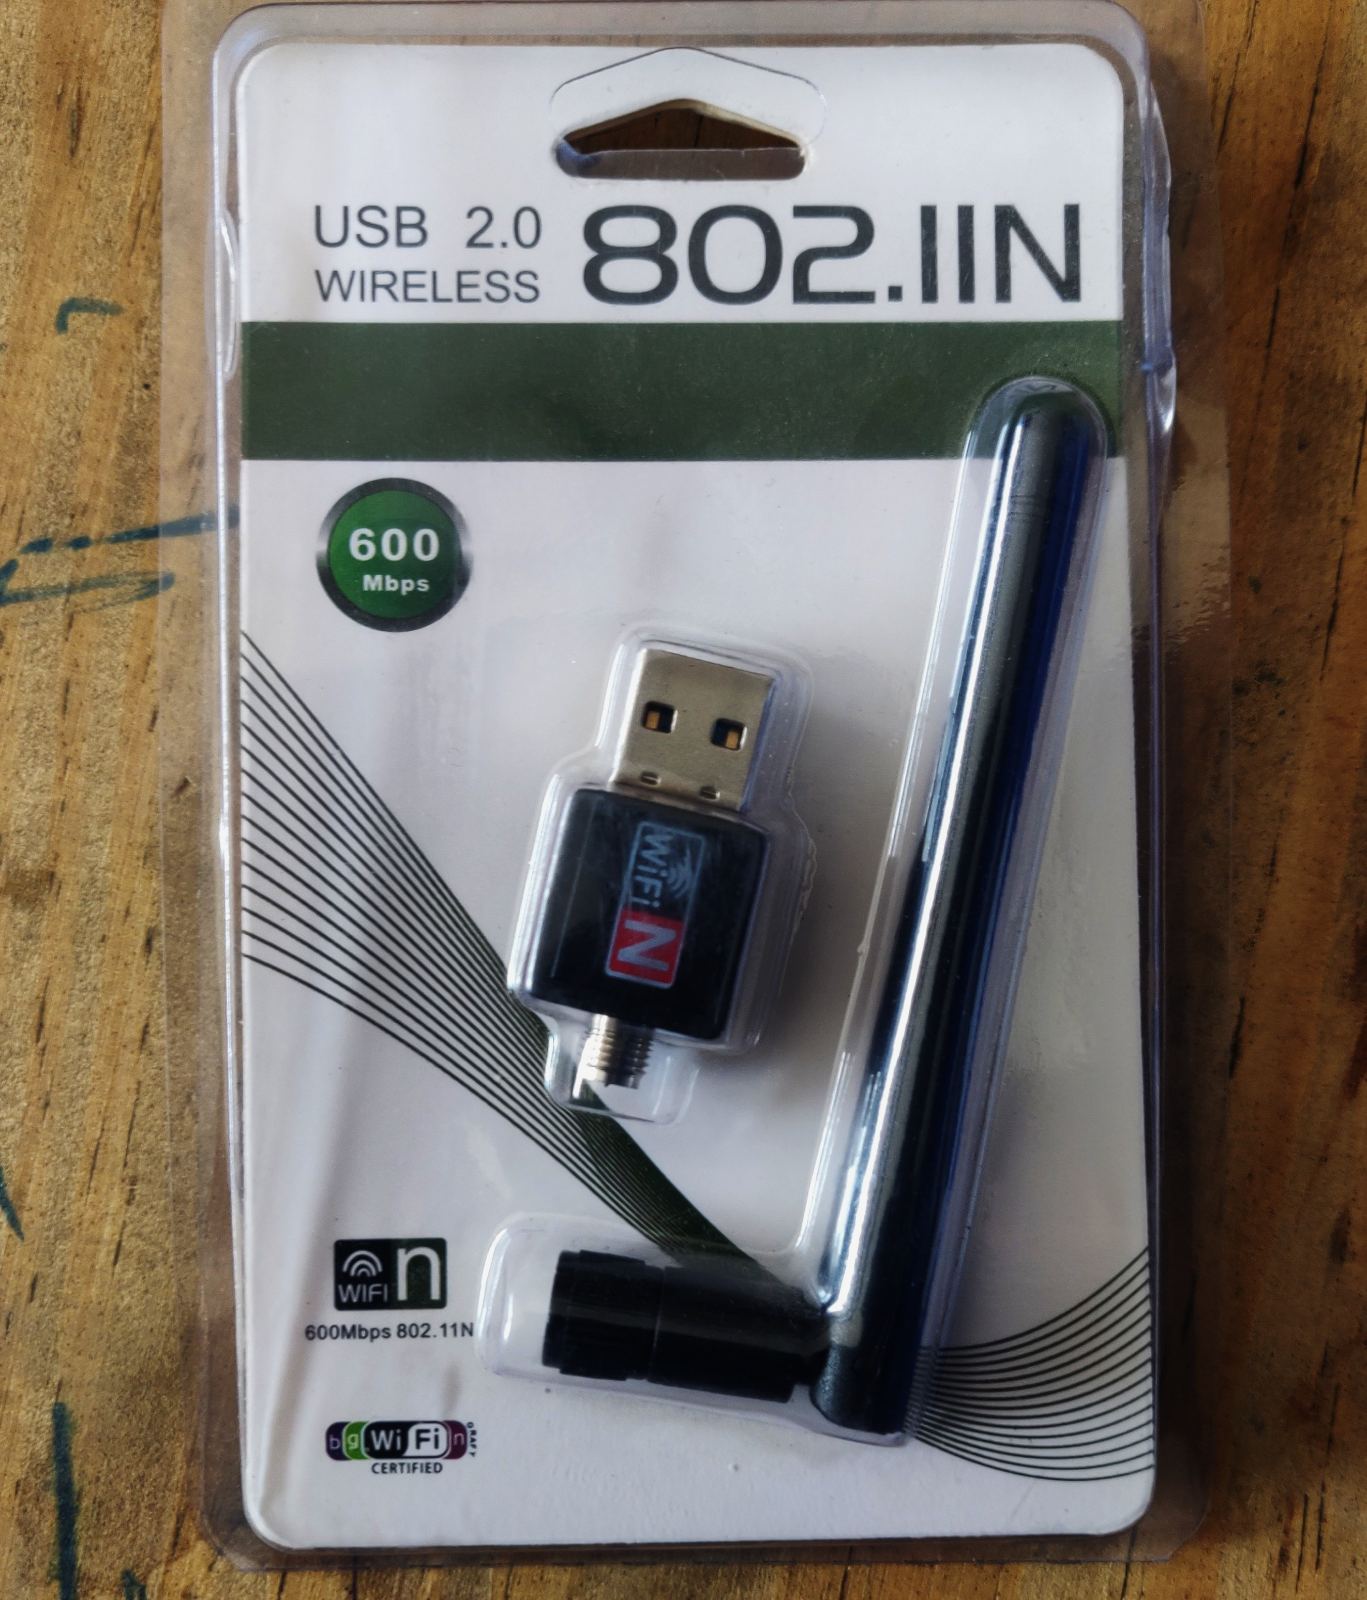 802.11n USB Wireless LAN Card Free For Buy Online at Best Prices Nepal |